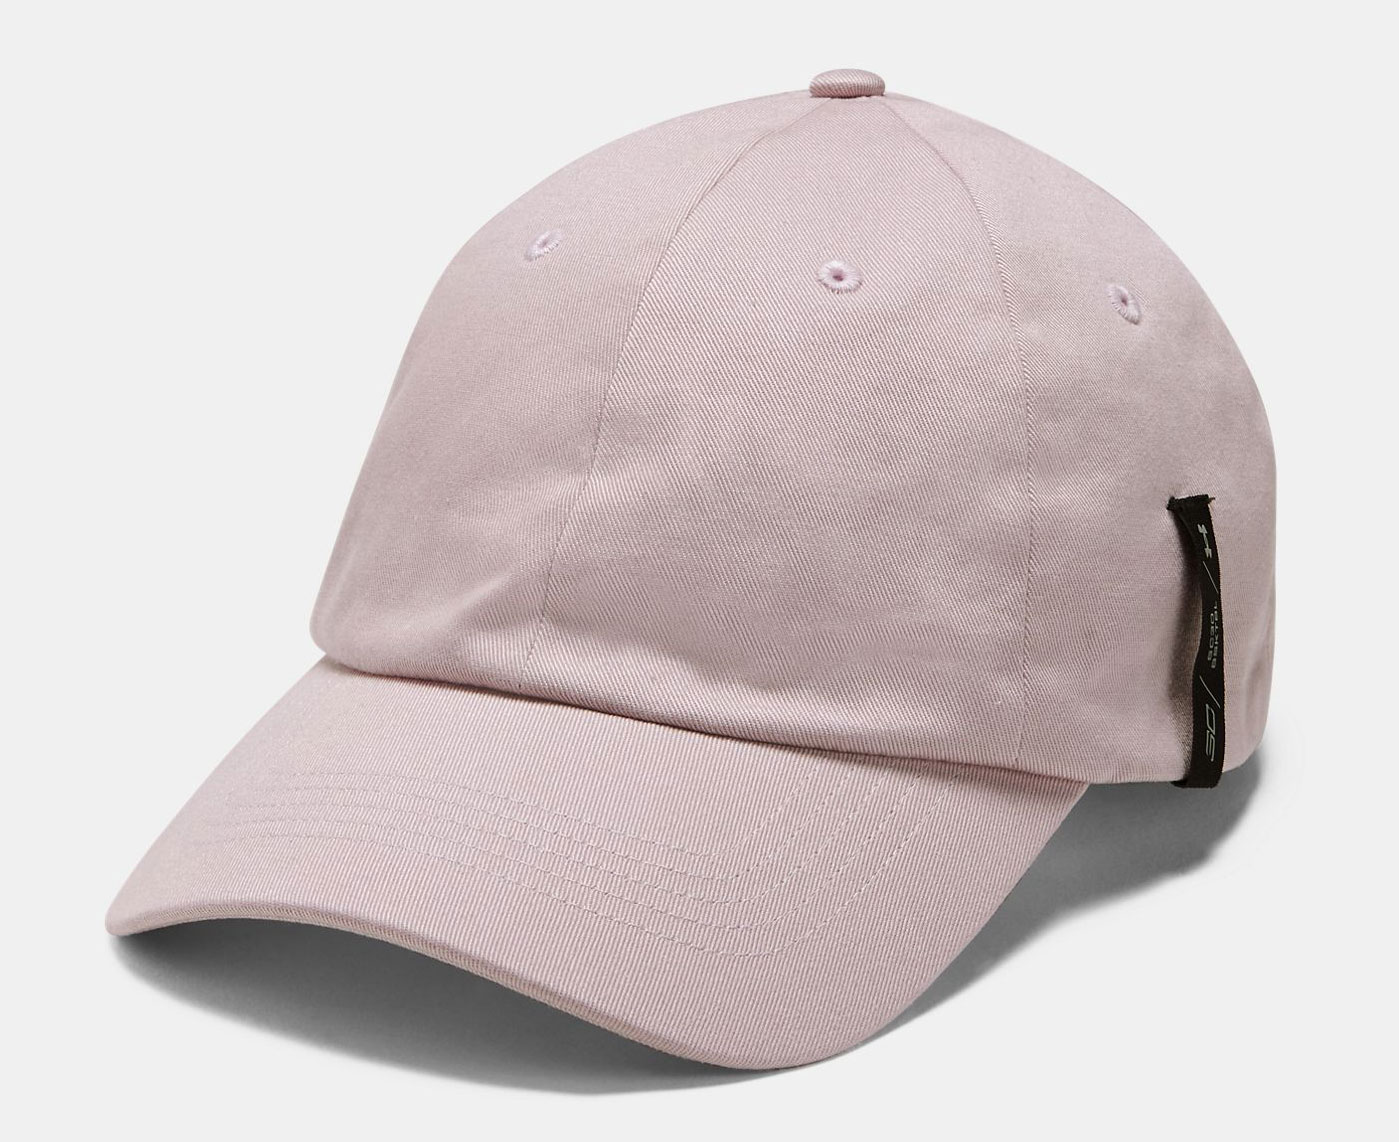 curry-7-hat-pink-1